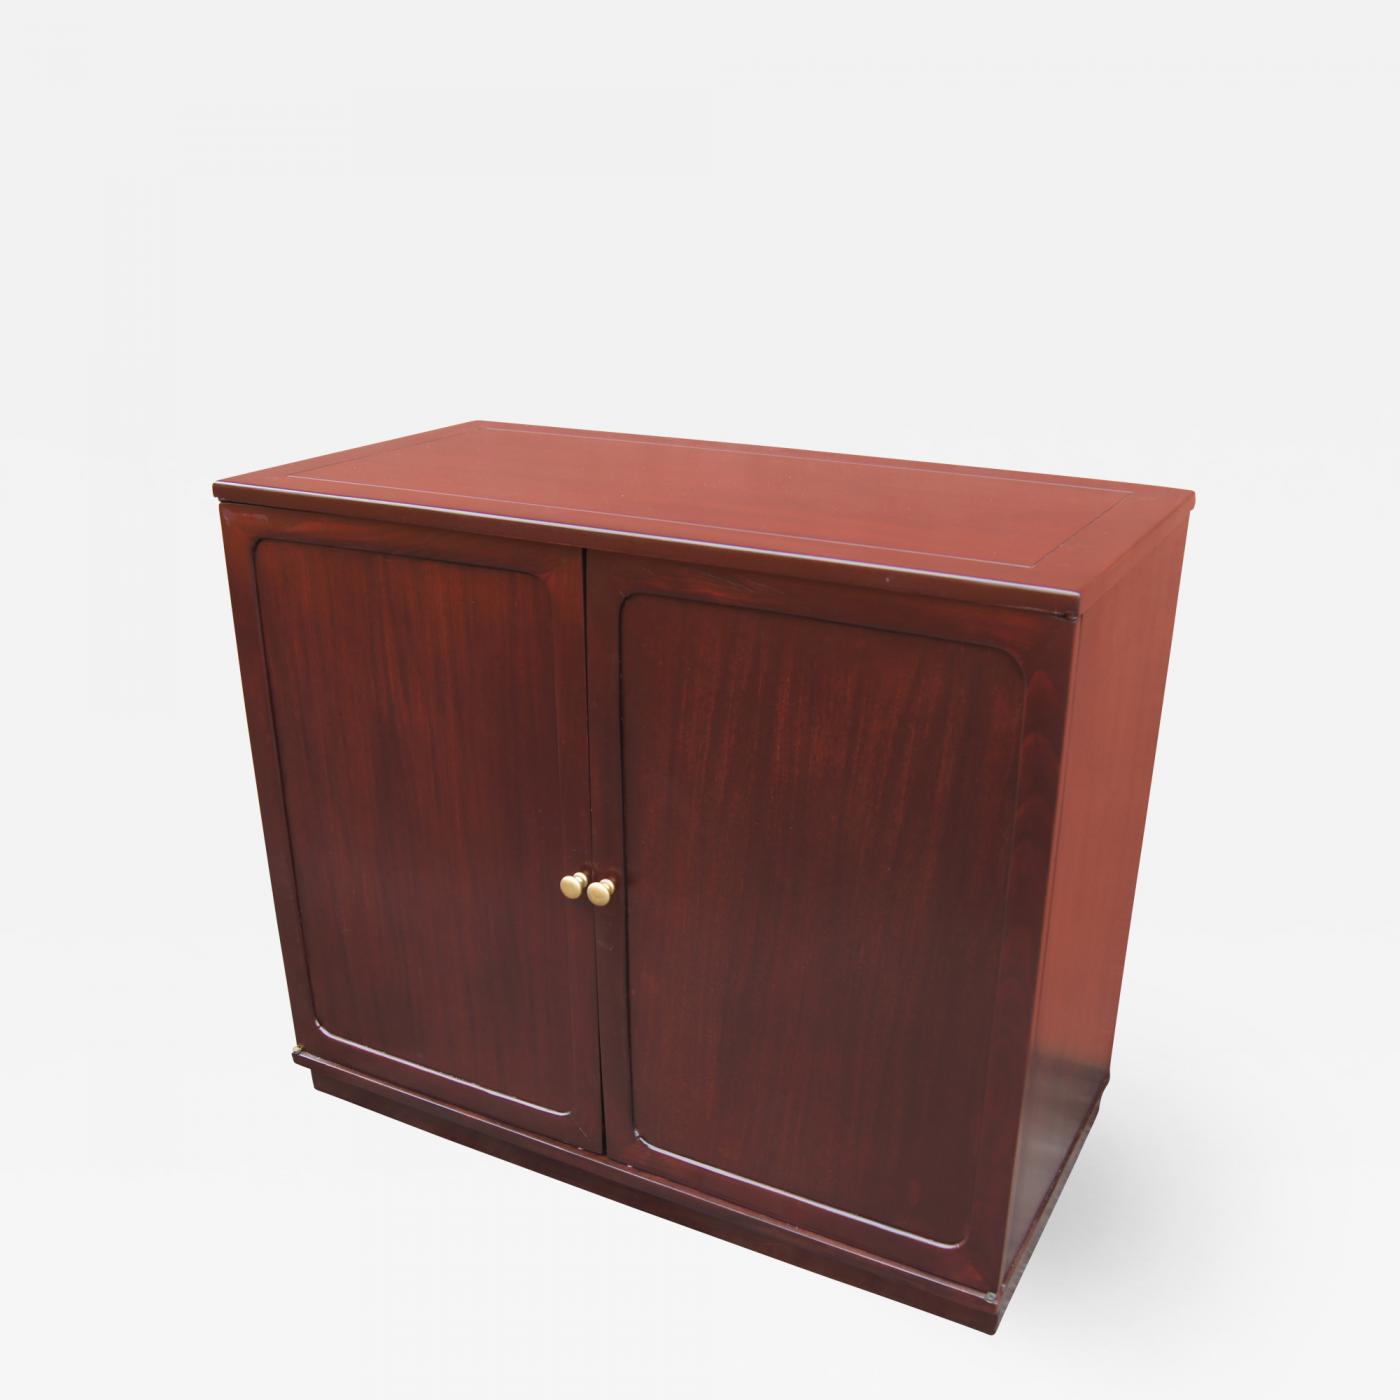 Drexel Drexel Heritage Furniture Small Precedent Cabinet By